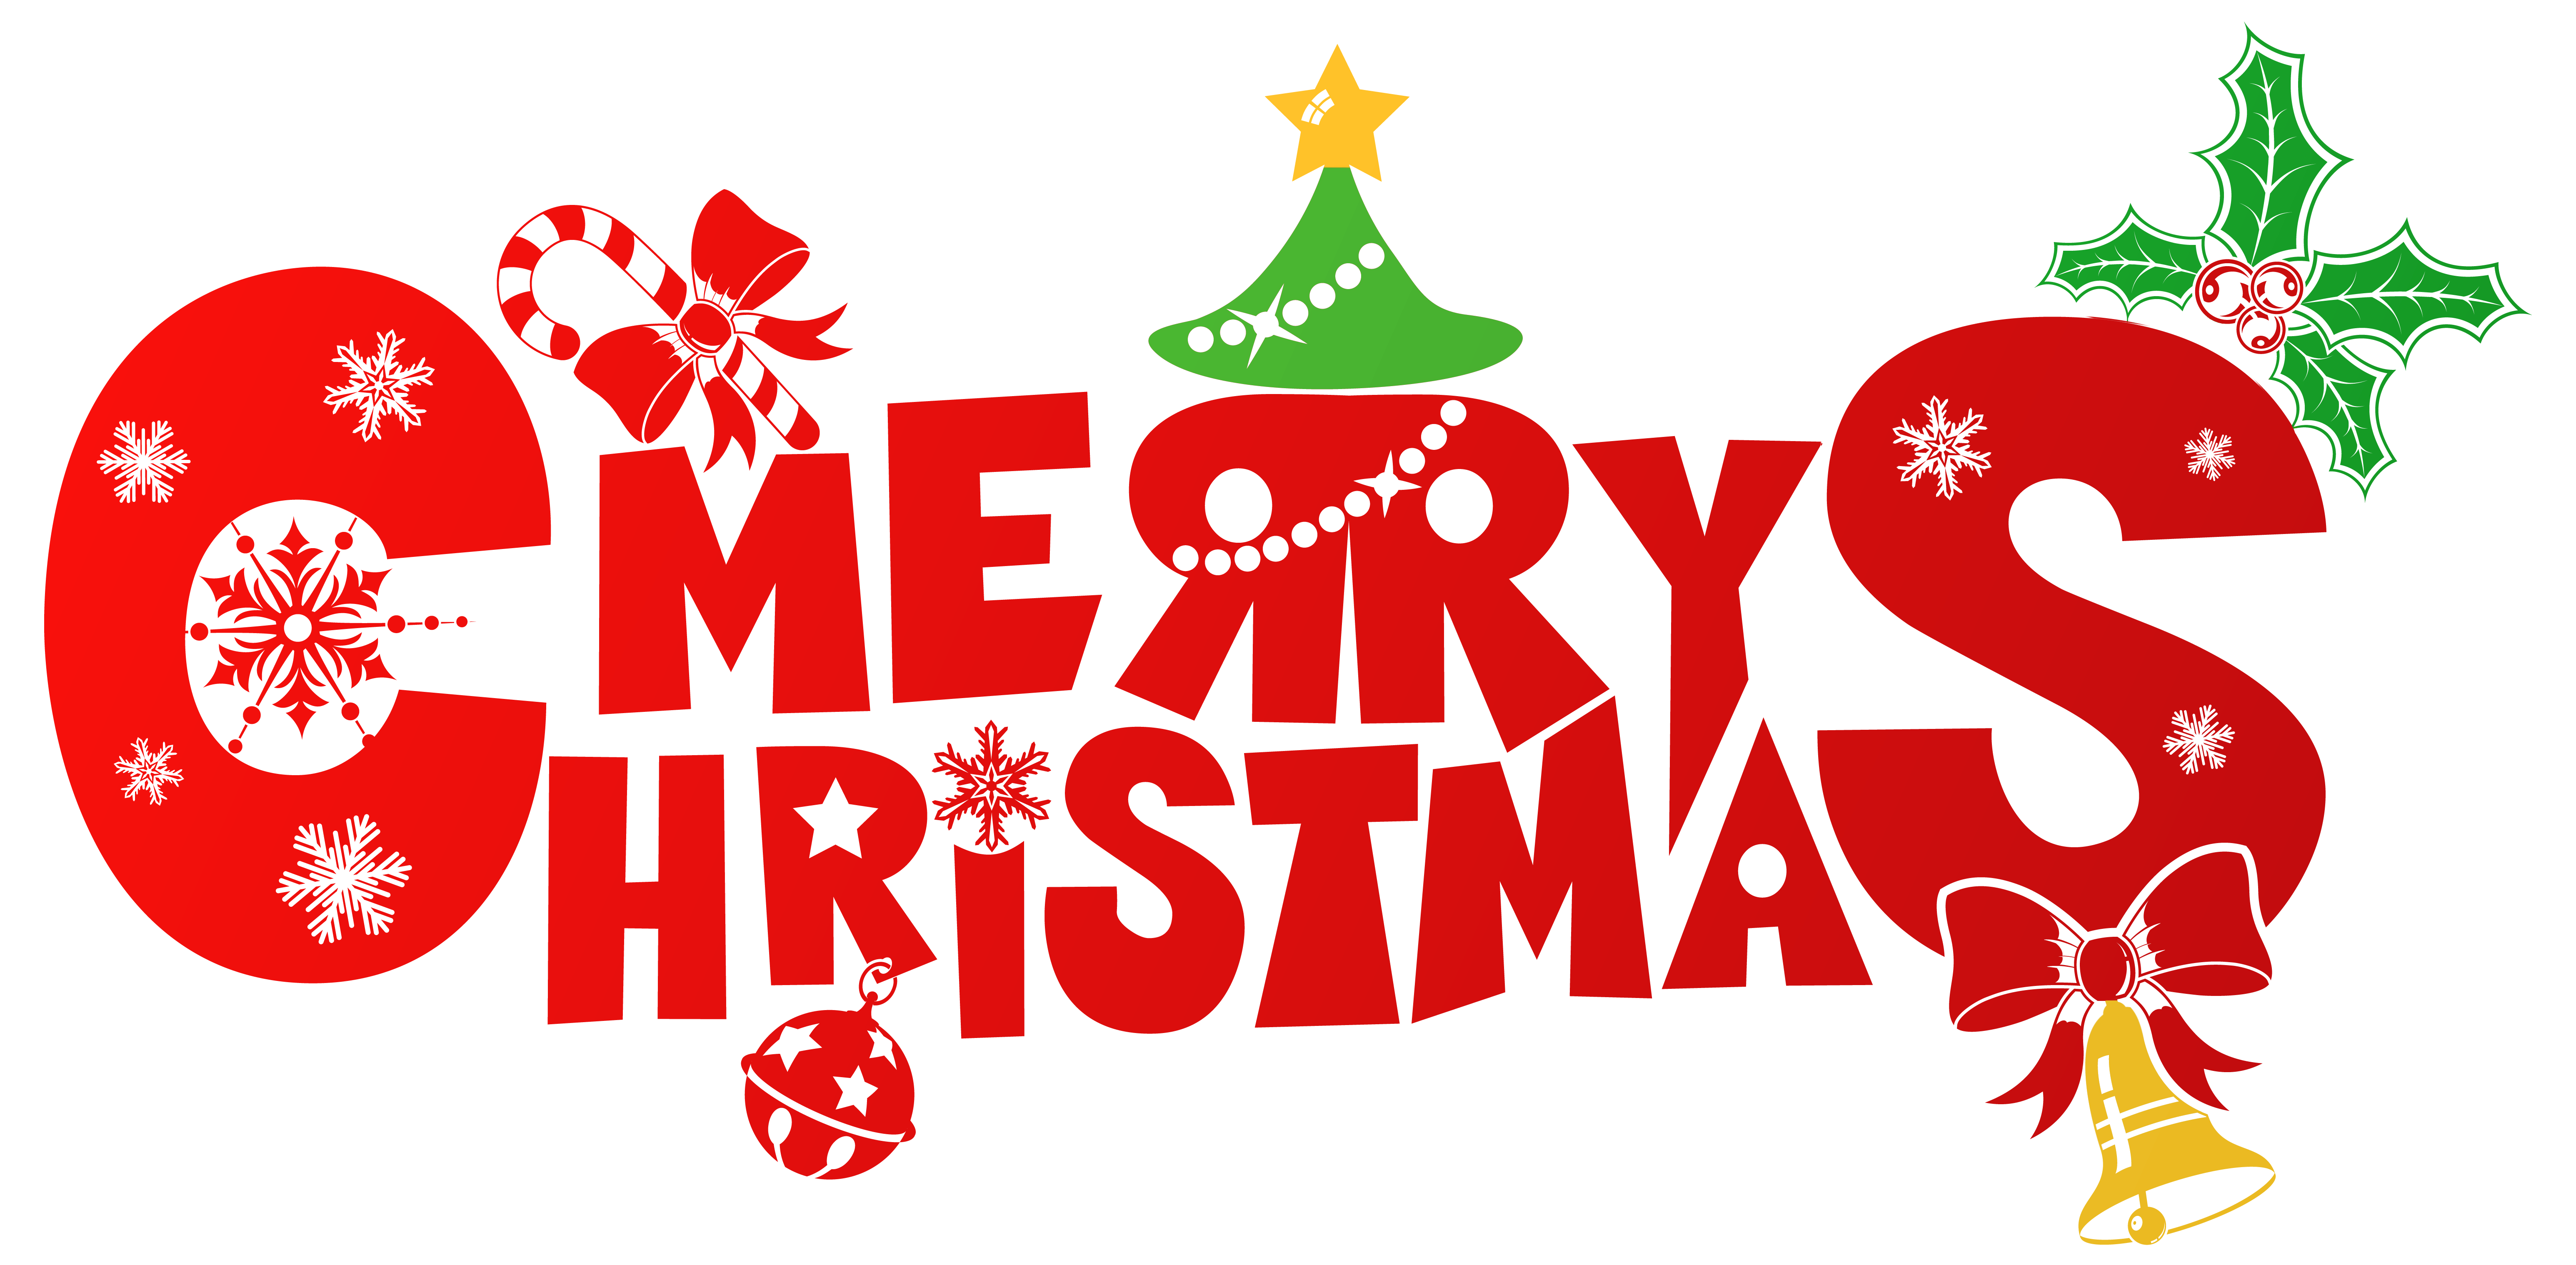 Red merry png image. Preschool clipart christmas